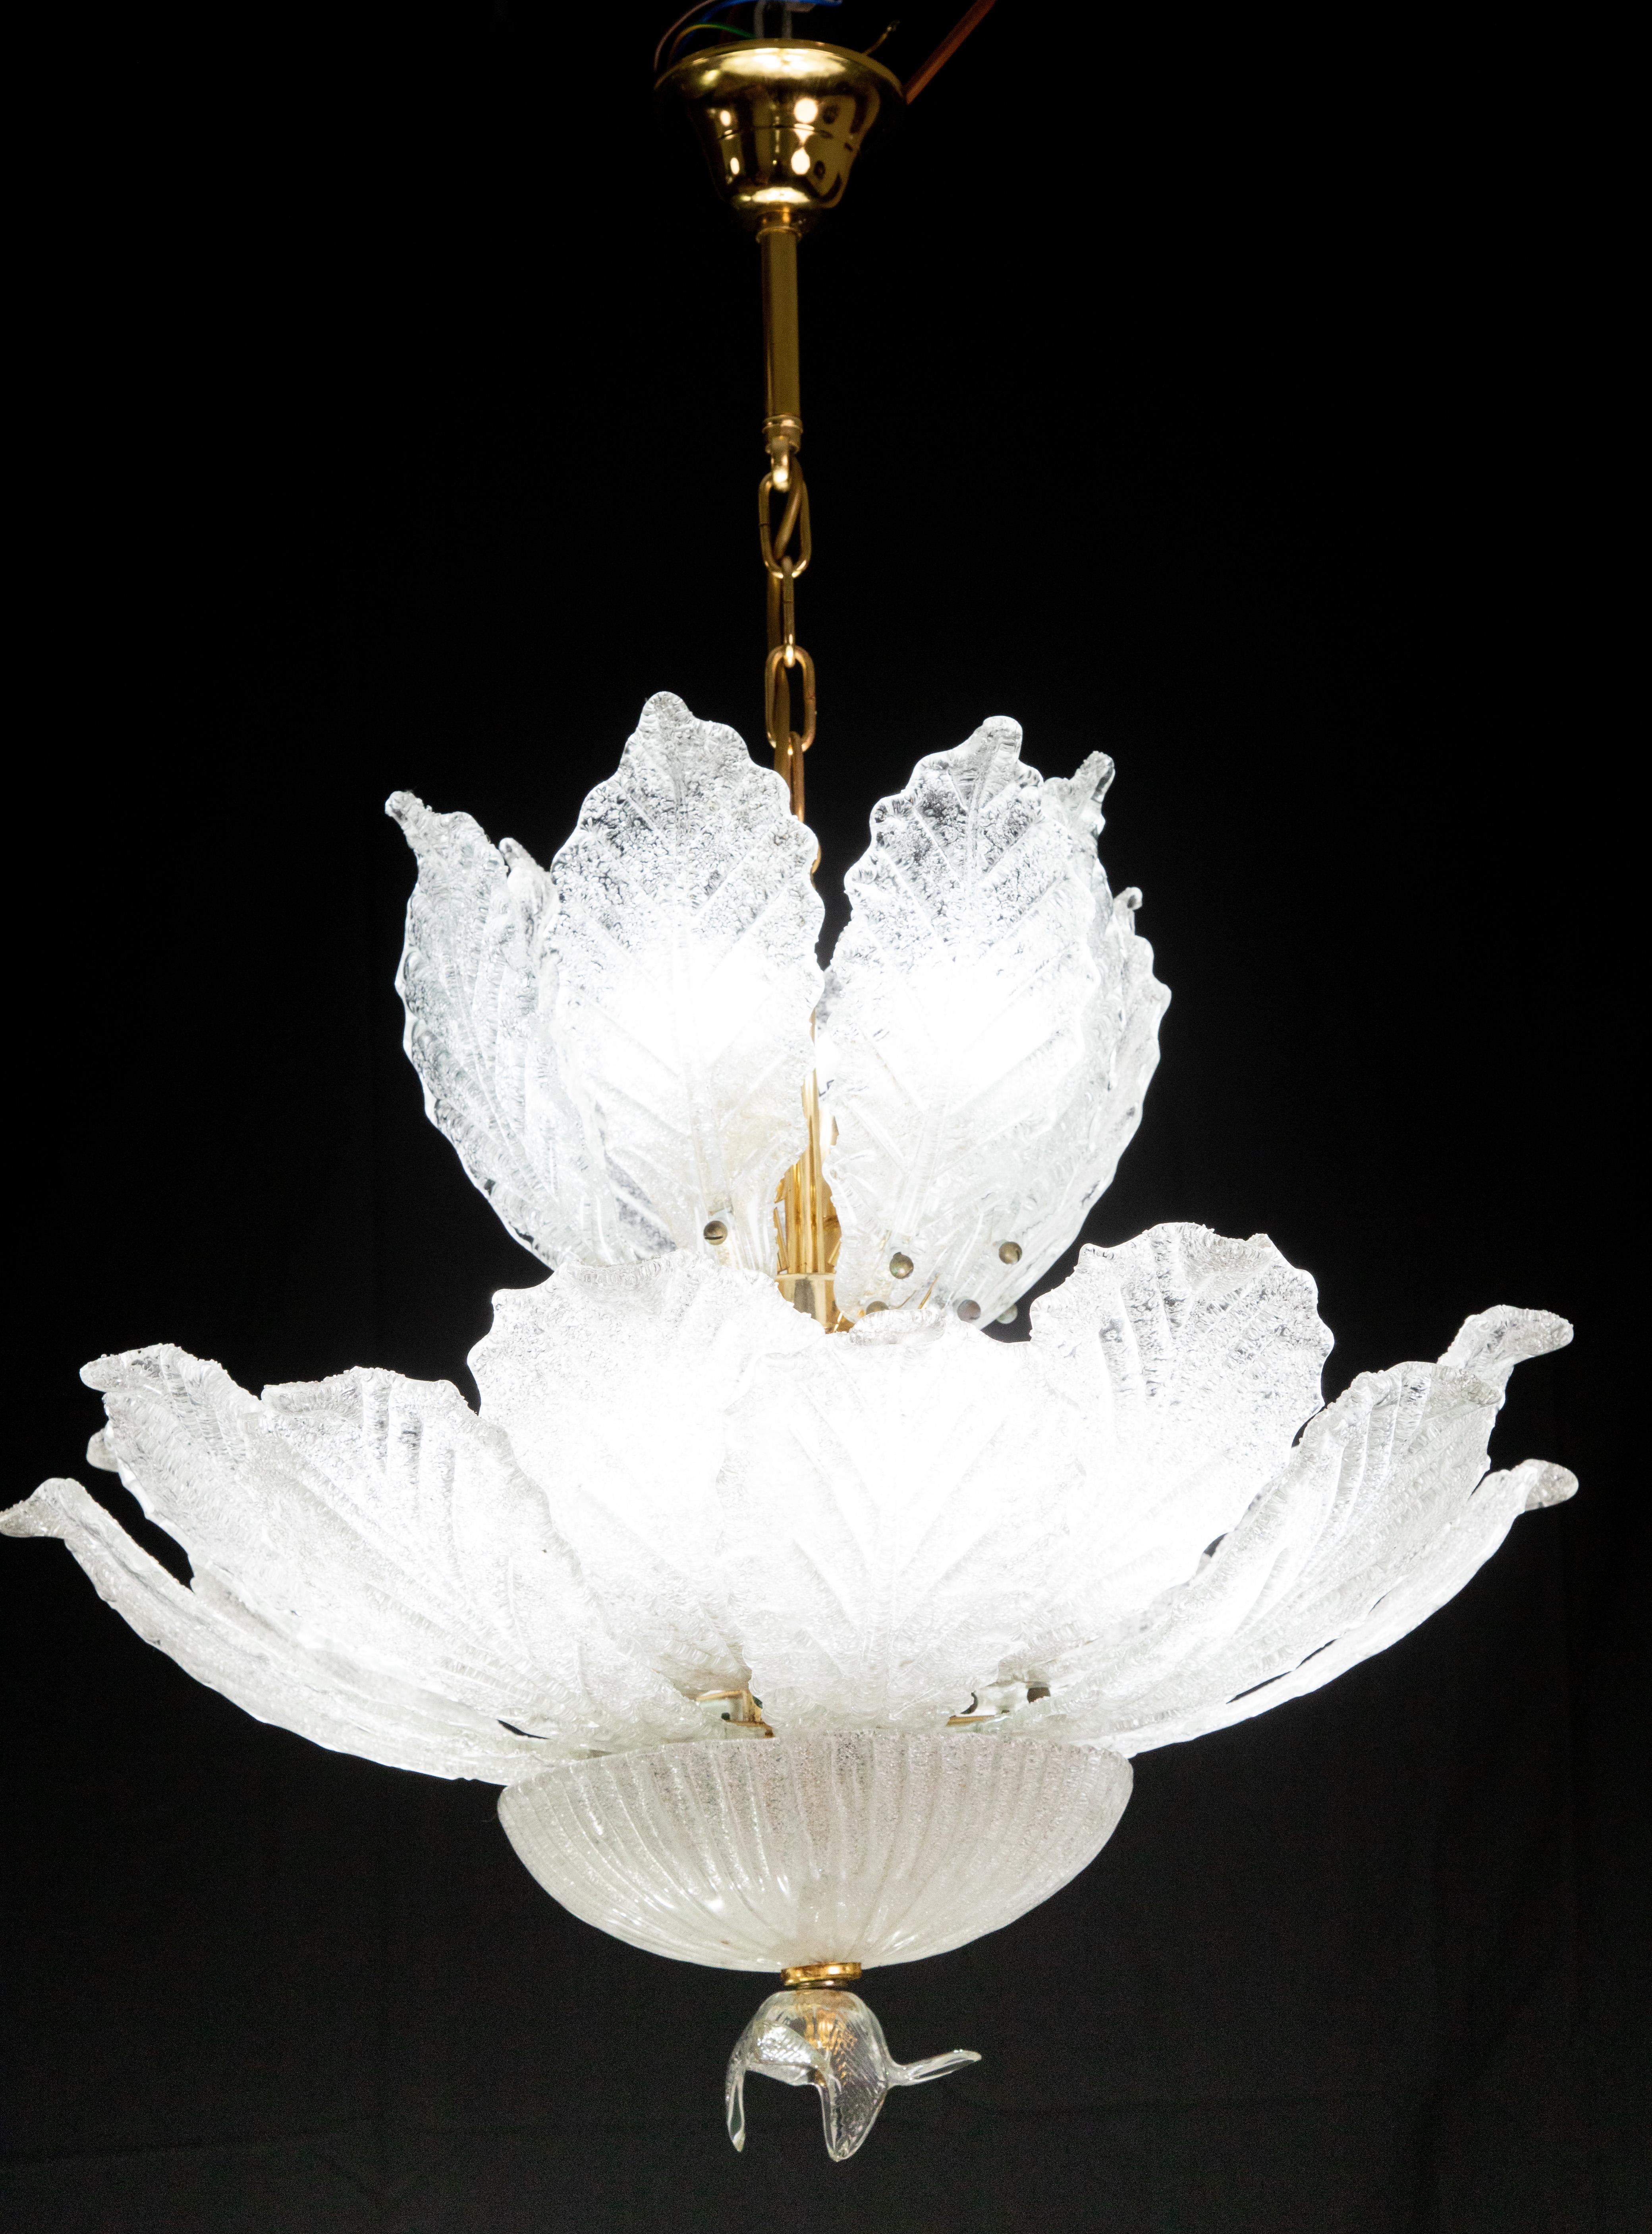 Splendid Murano glass ceiling lamp.

Period: circa 1970.

The light mounts 12 standard European e14 lamp holders.

Perfect for decorating a large space.

Height measures 100 centimeters from the ceiling, diameter about 65 centimeters.